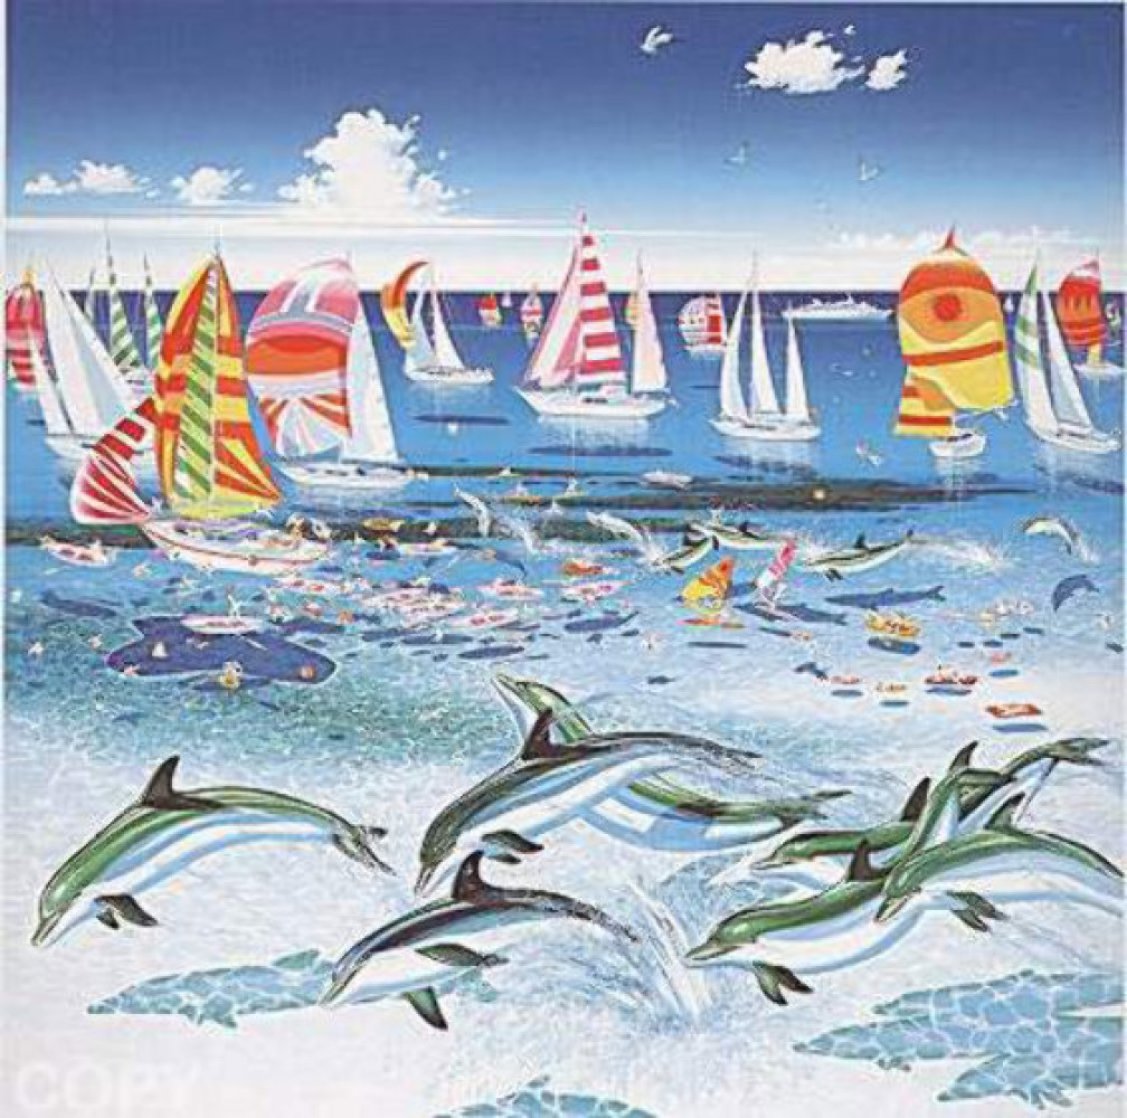 Dolphins 1984 Limited Edition Print by Hiro Yamagata